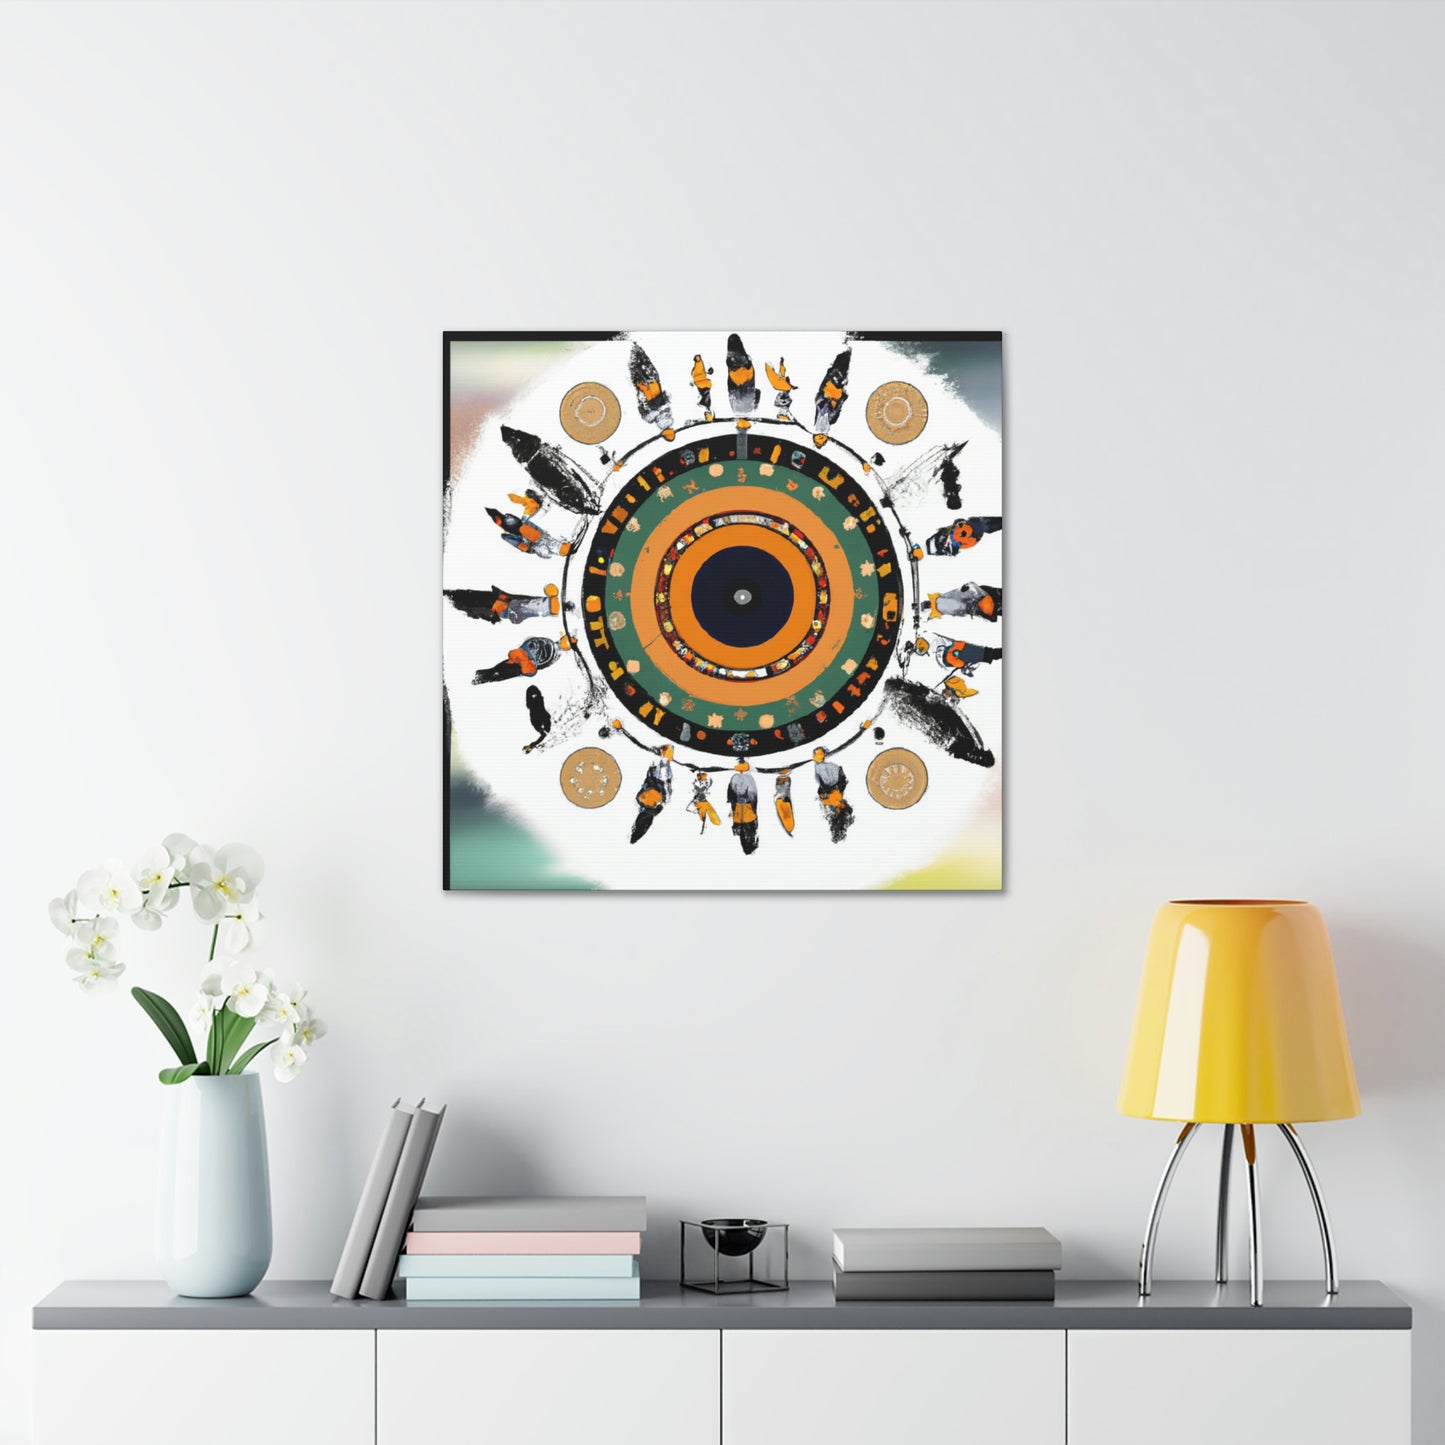 Wakanoni, the Great Chief. - Native American Indian Canvas Wall Art